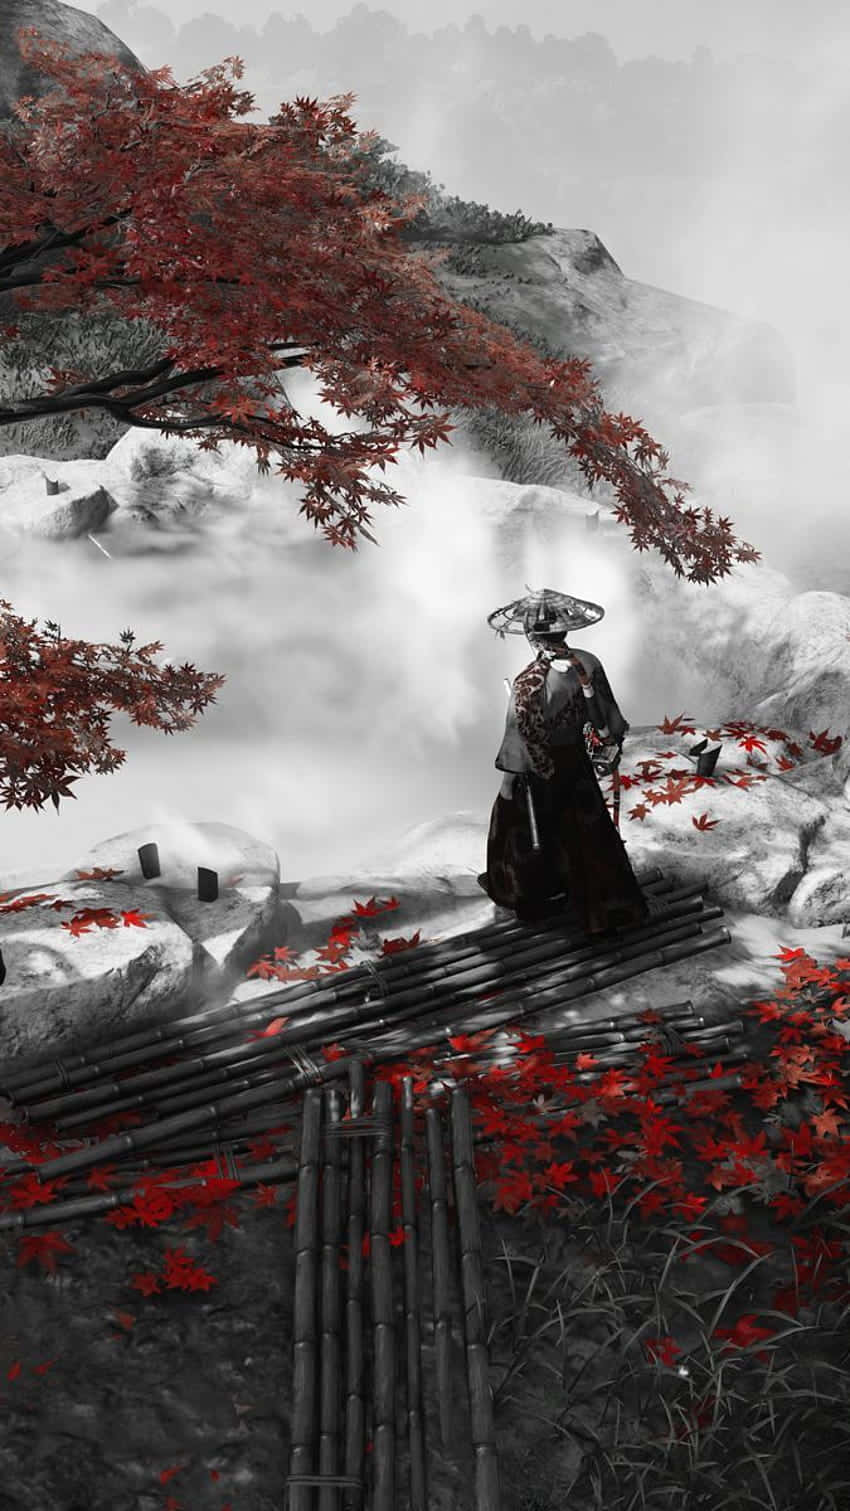 Join the fight for Tsushima in a stunning Samurai adventure on the iPhone Wallpaper